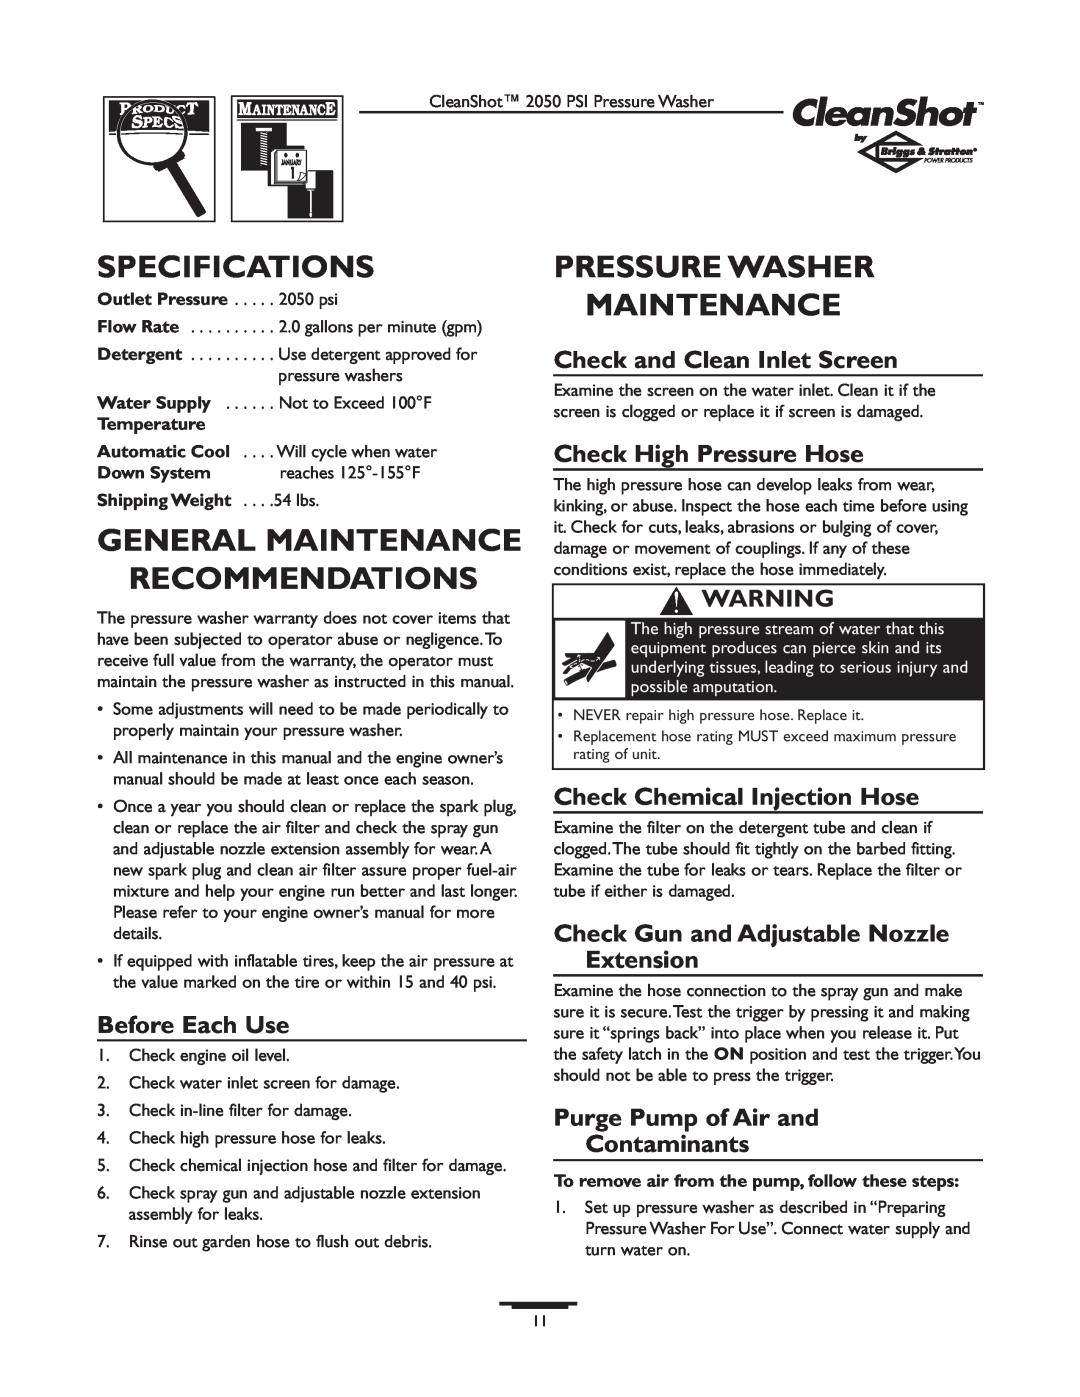 Briggs & Stratton 2050PSI Specifications, General Maintenance Recommendations, Pressure Washer Maintenance, Temperature 